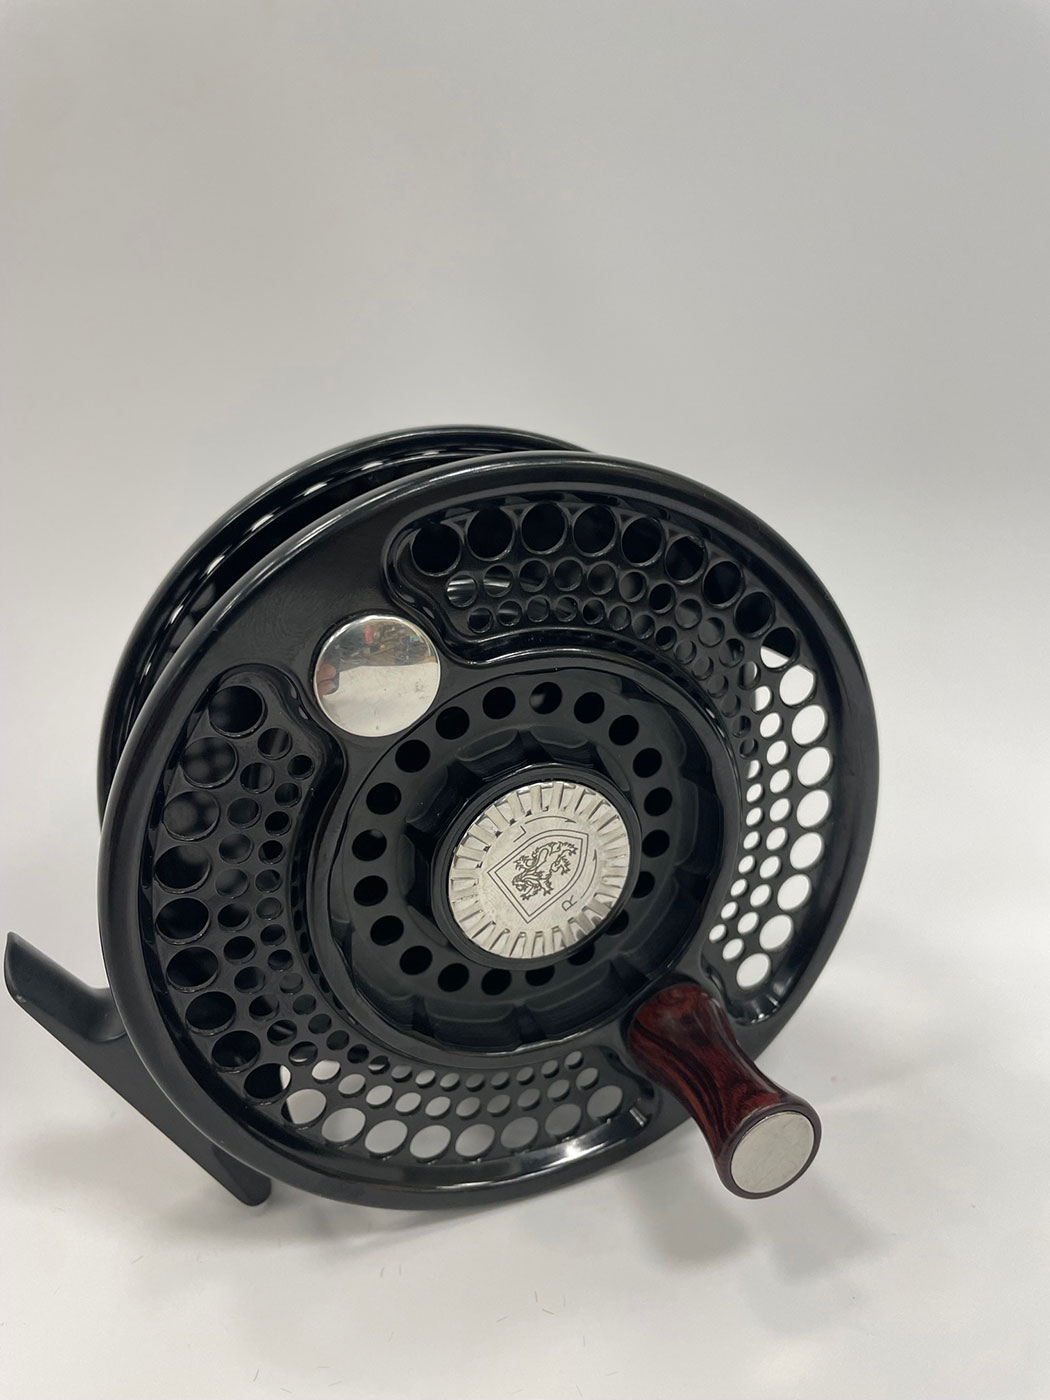 All Charlton Reels - The Angling Company